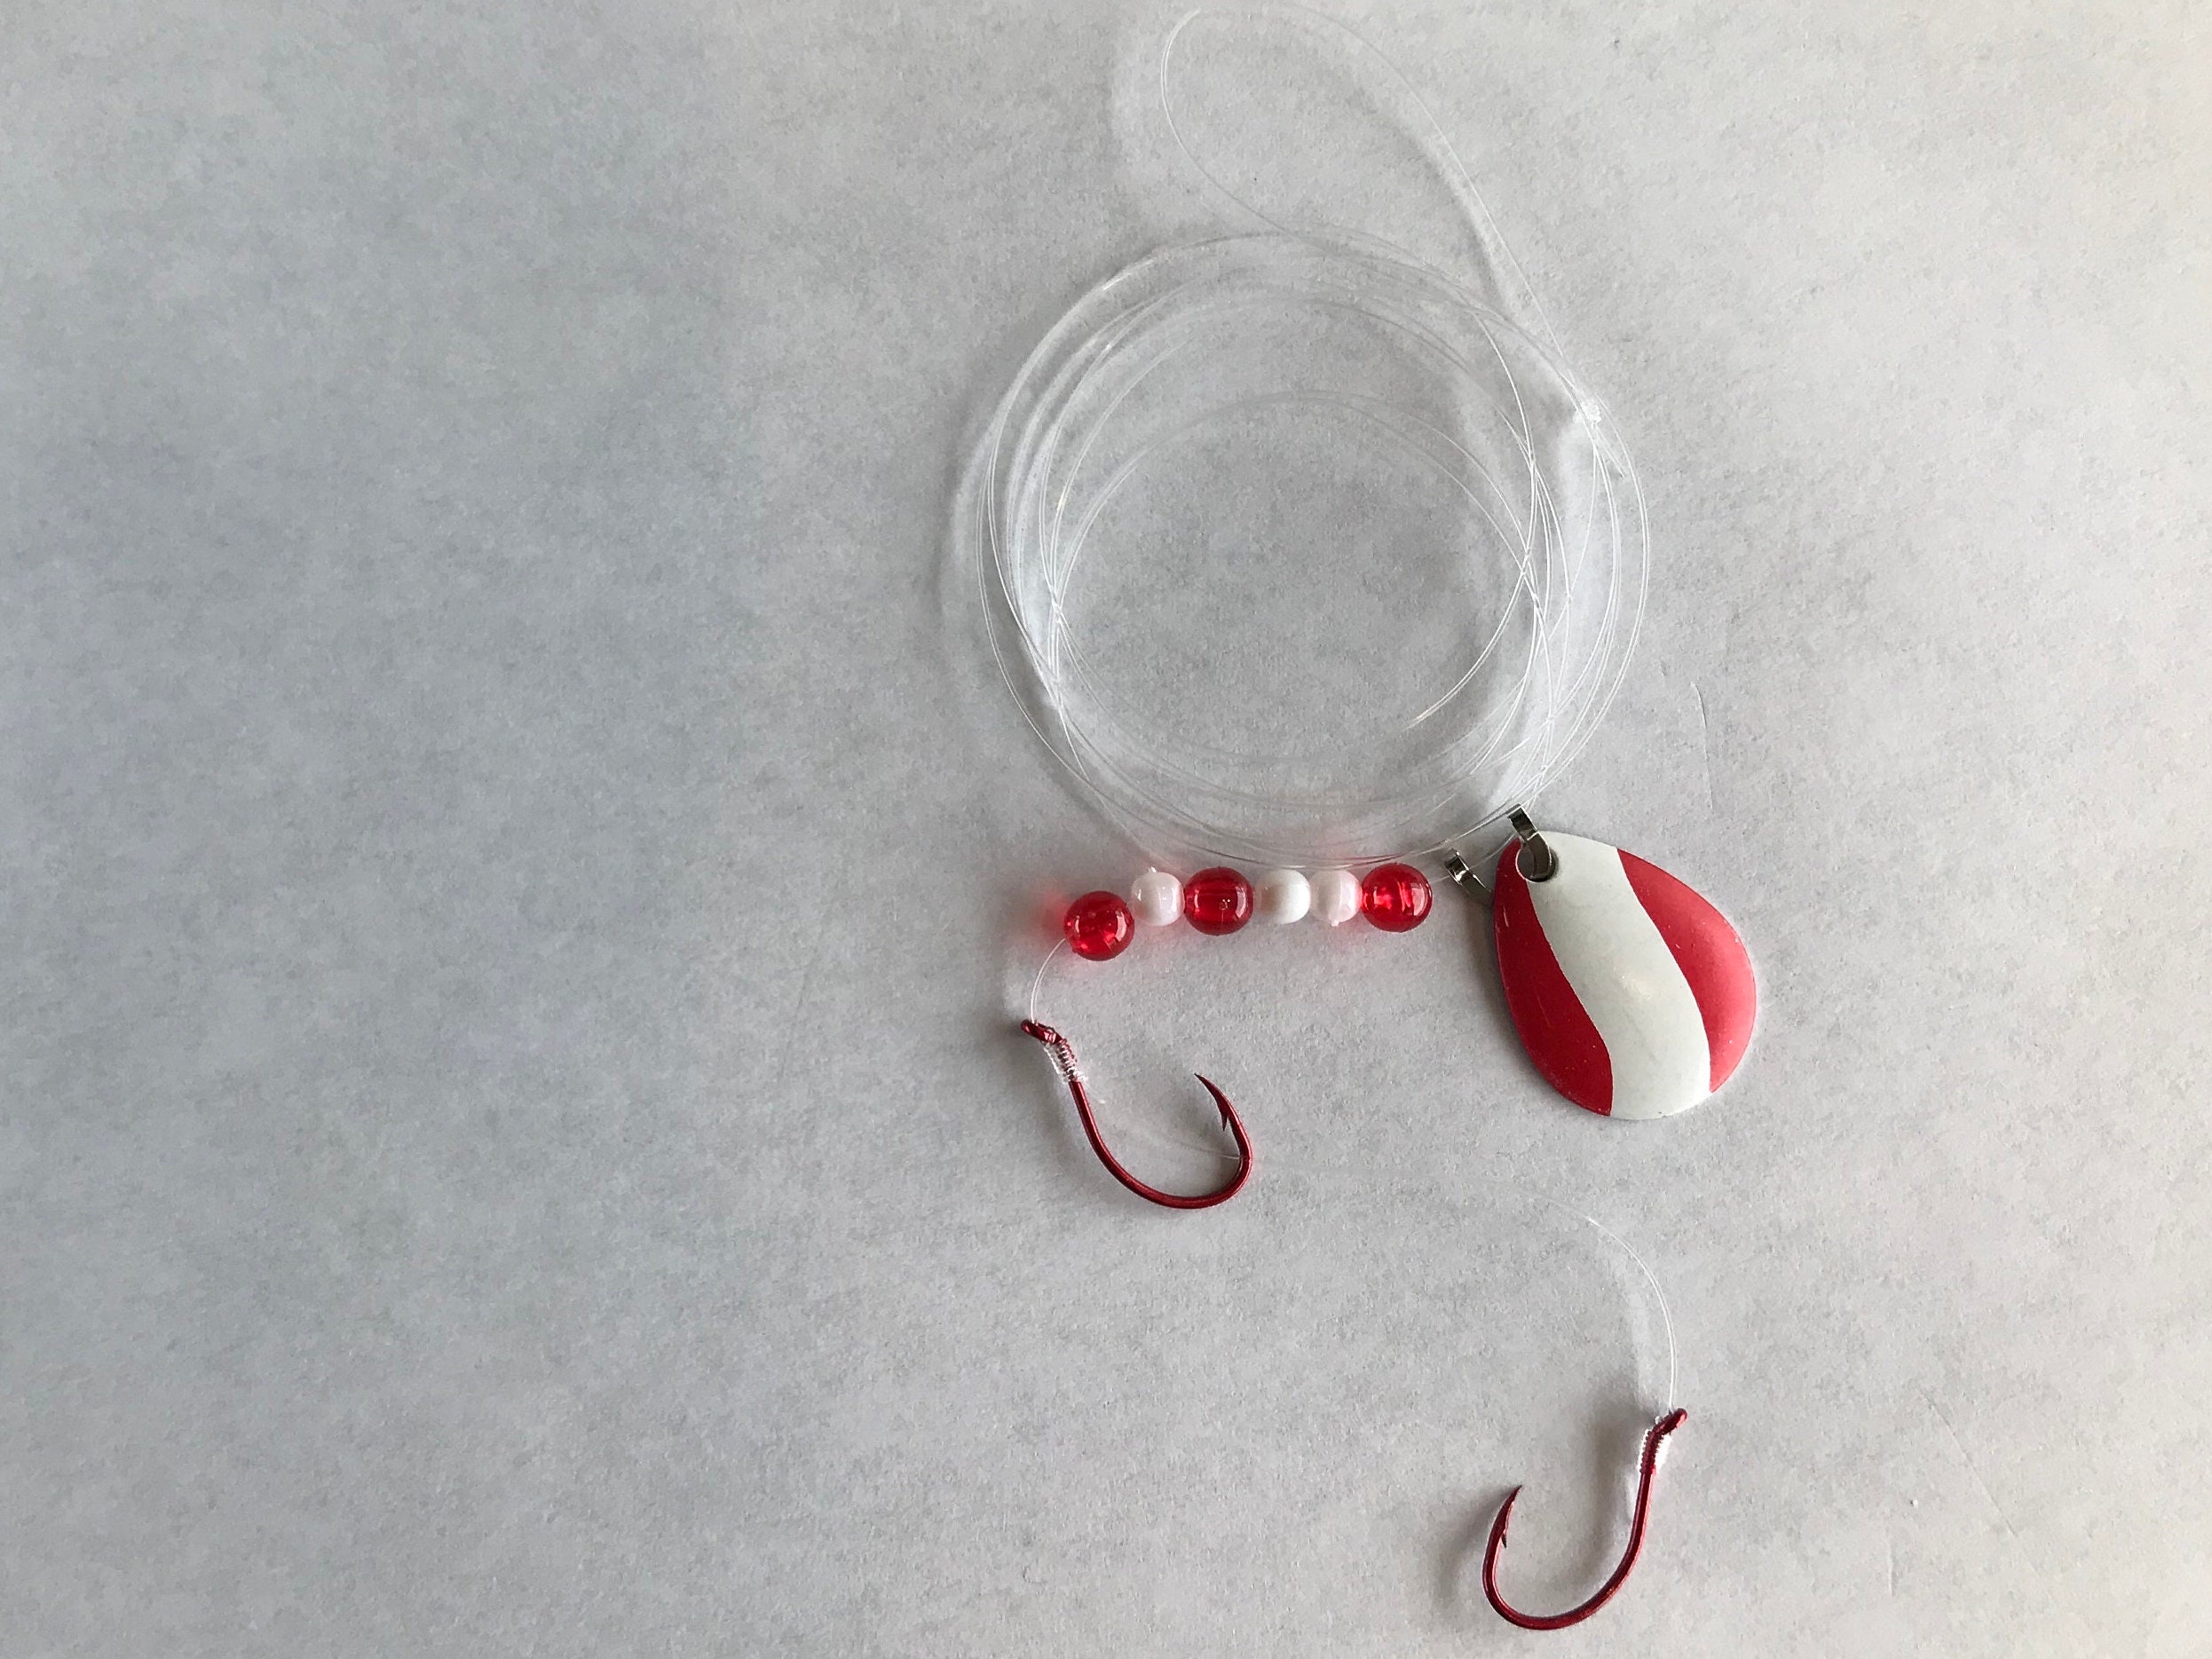 Crawler / Worm Harness: Three 3 Red and White Crawler Harnesses 